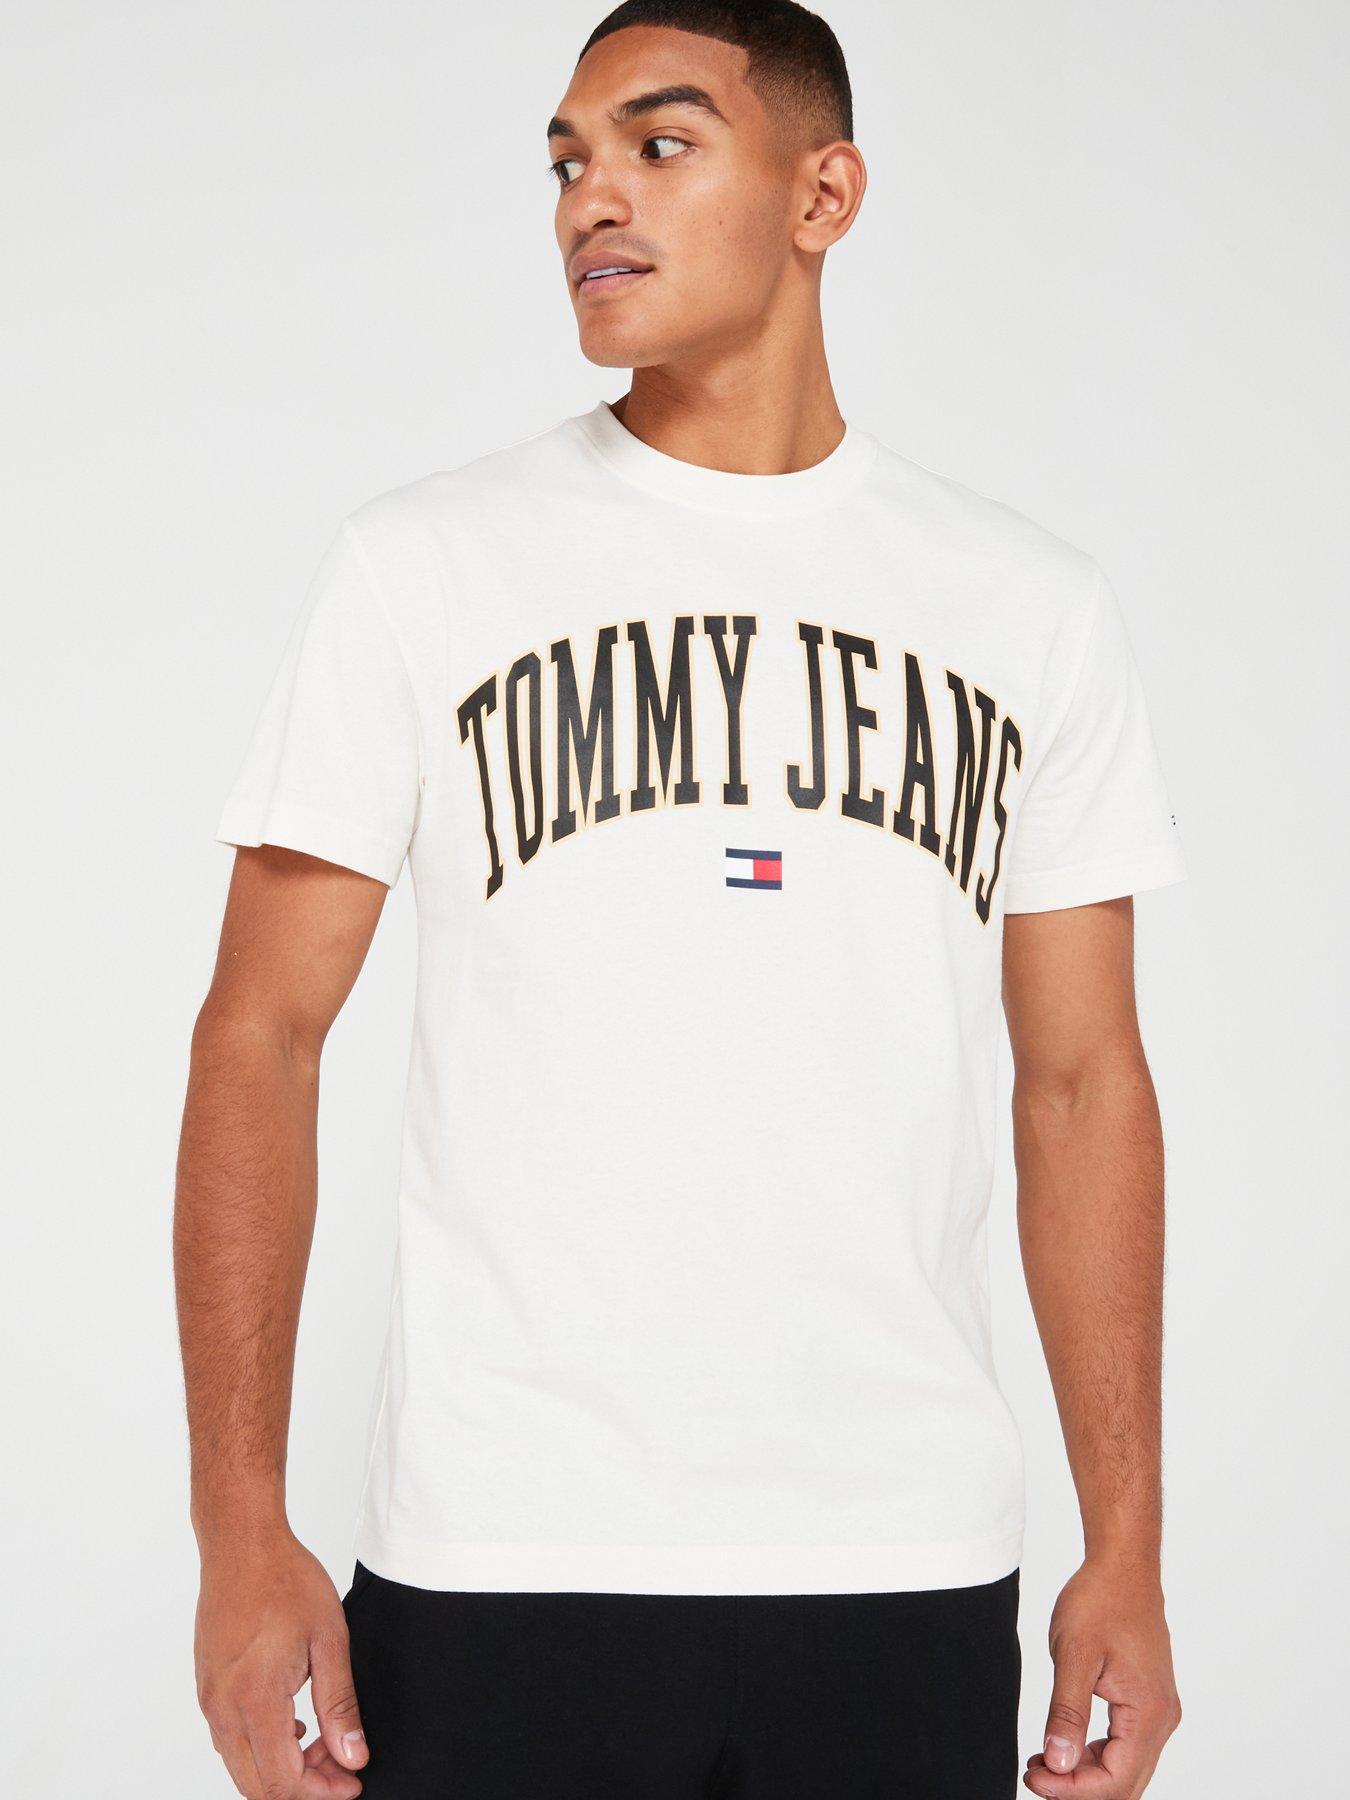 This Month | Tommy hilfiger polos | & | T-shirts Men